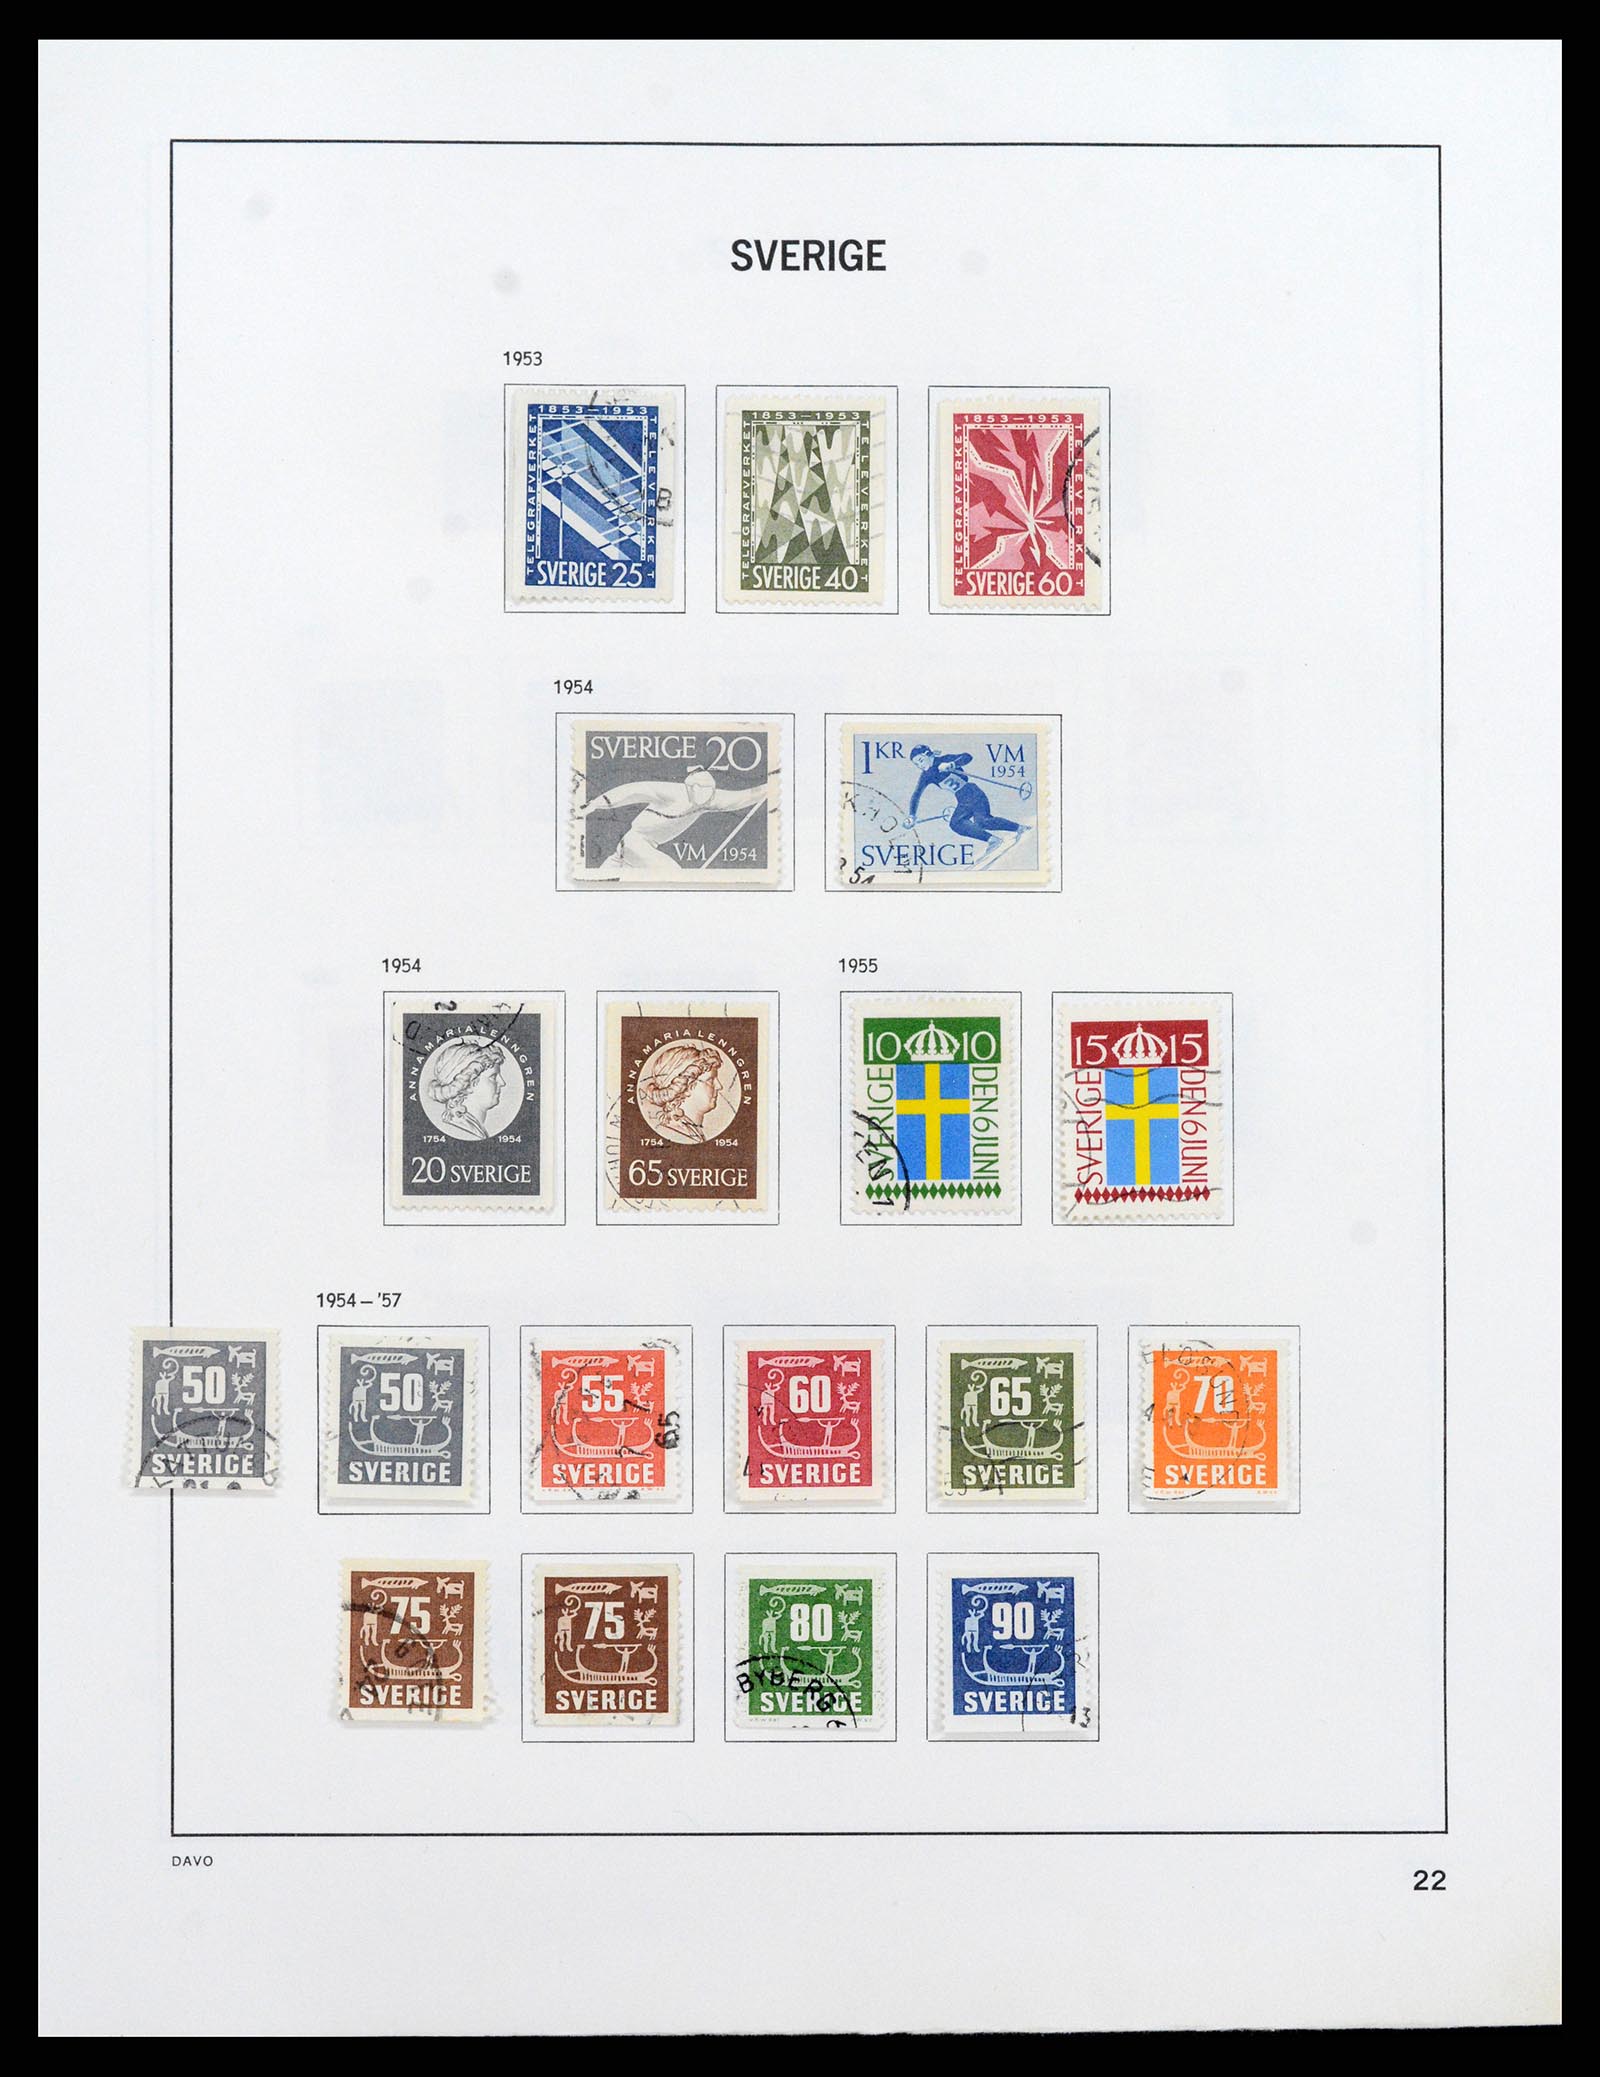 37414 031 - Stamp collection 37414 Sweden 1855-1997.